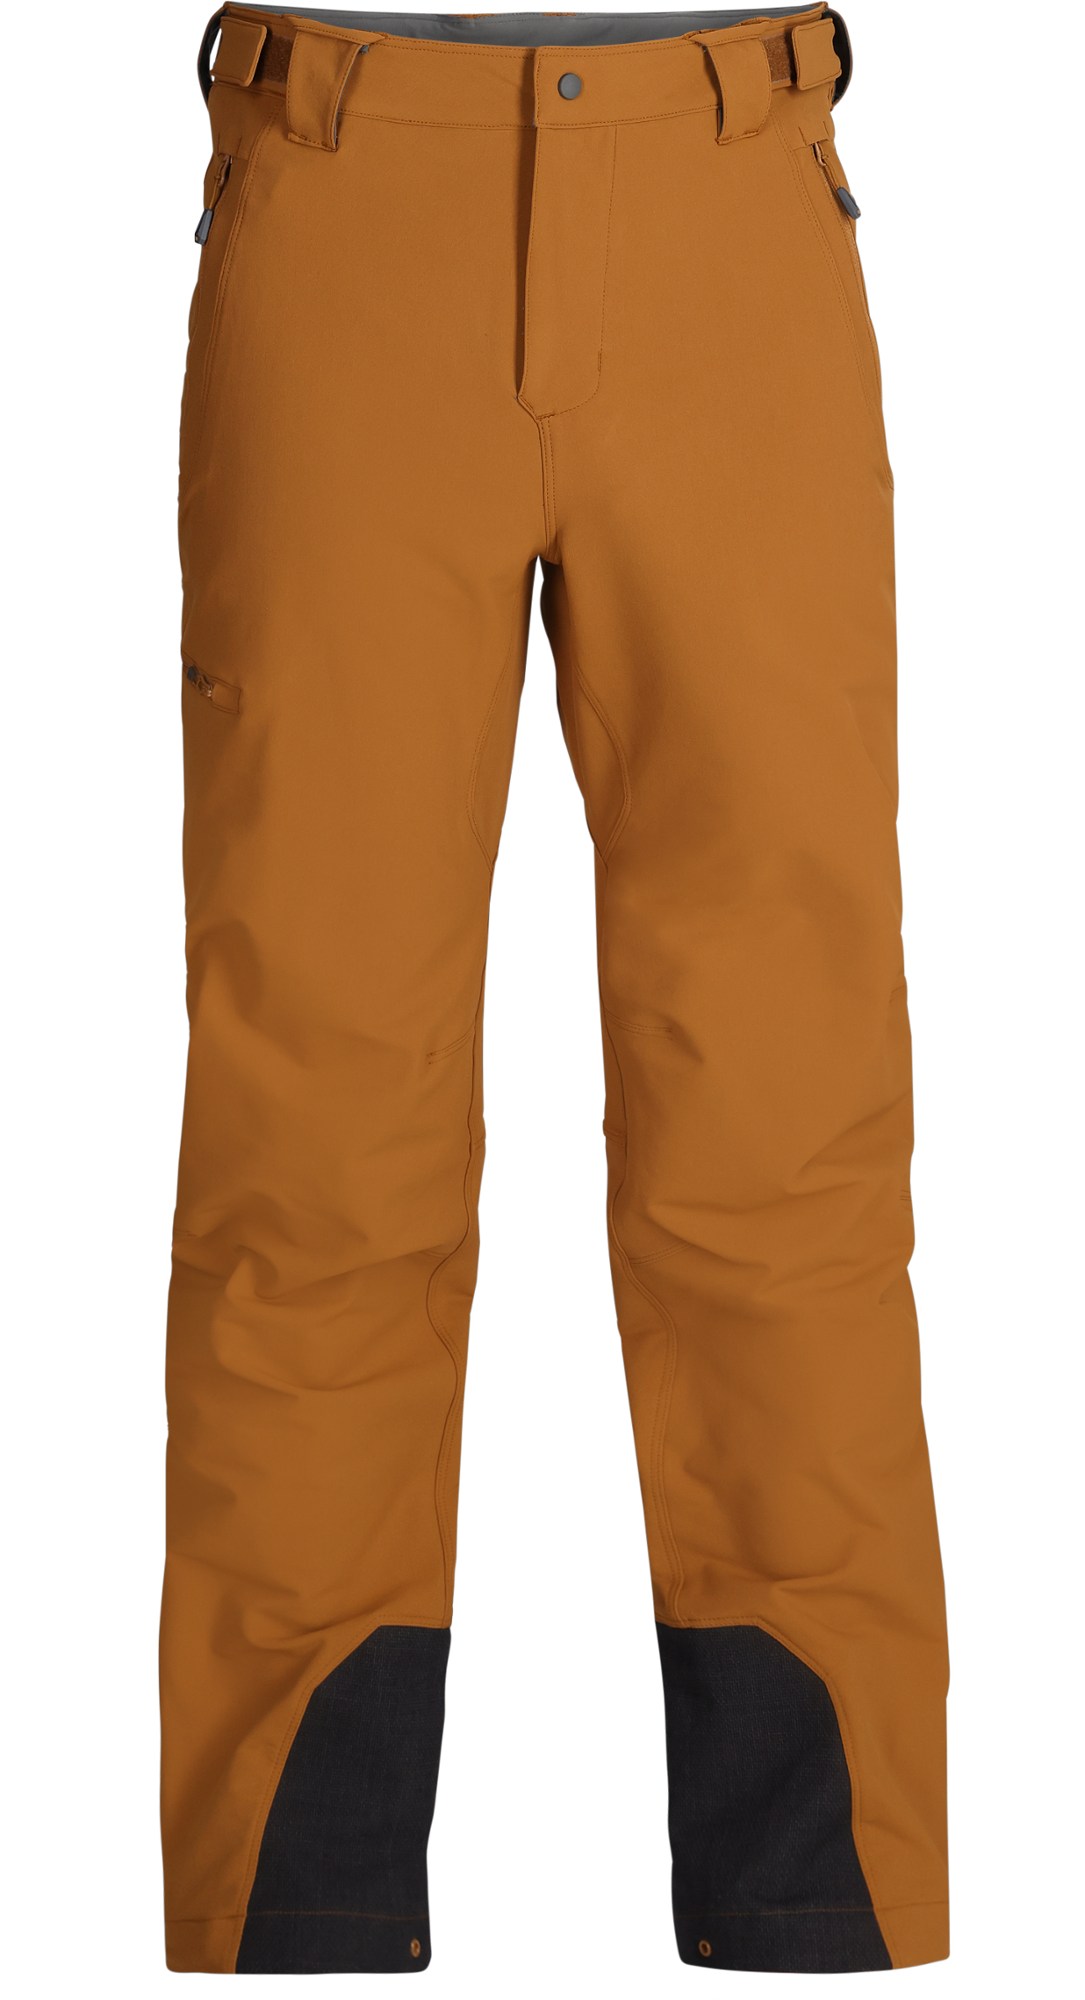 Outdoor Research Cirque II Hikinf Pants